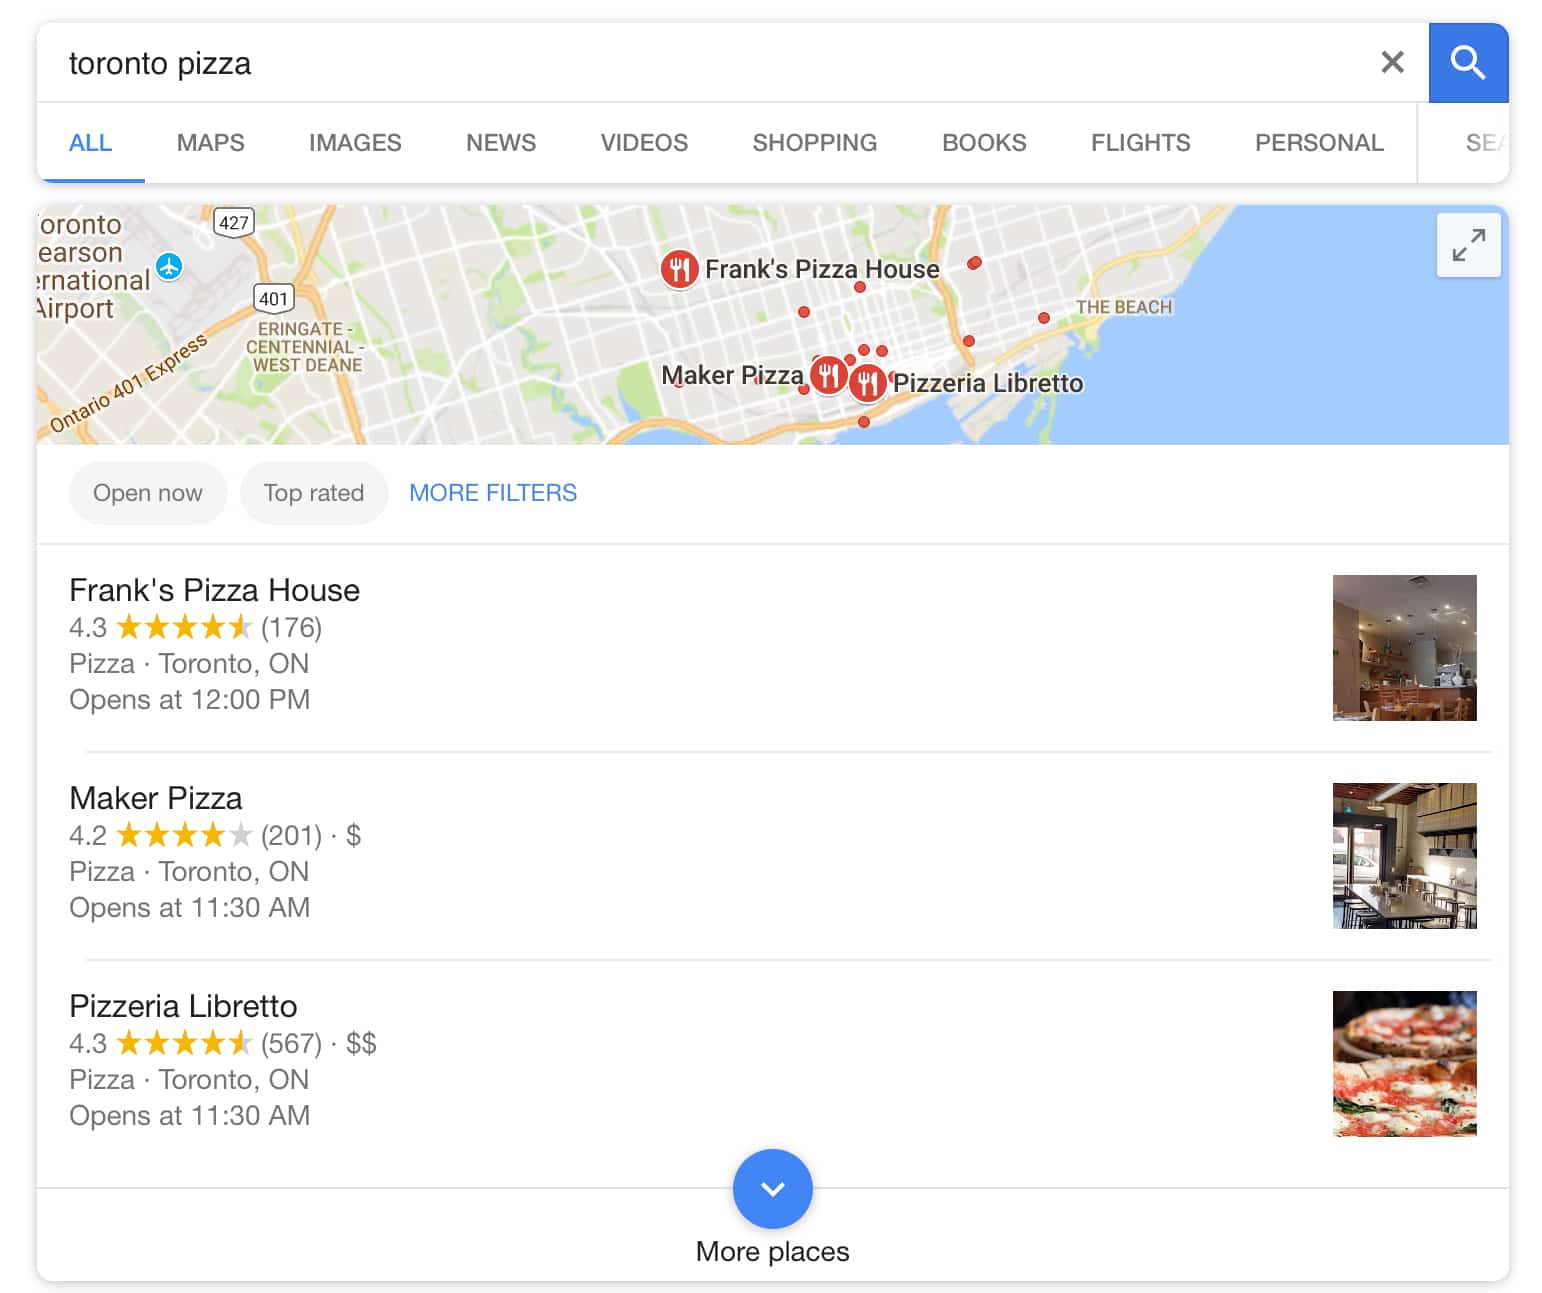 Google Rolls Out a Fresh Look for Mobile Search Results